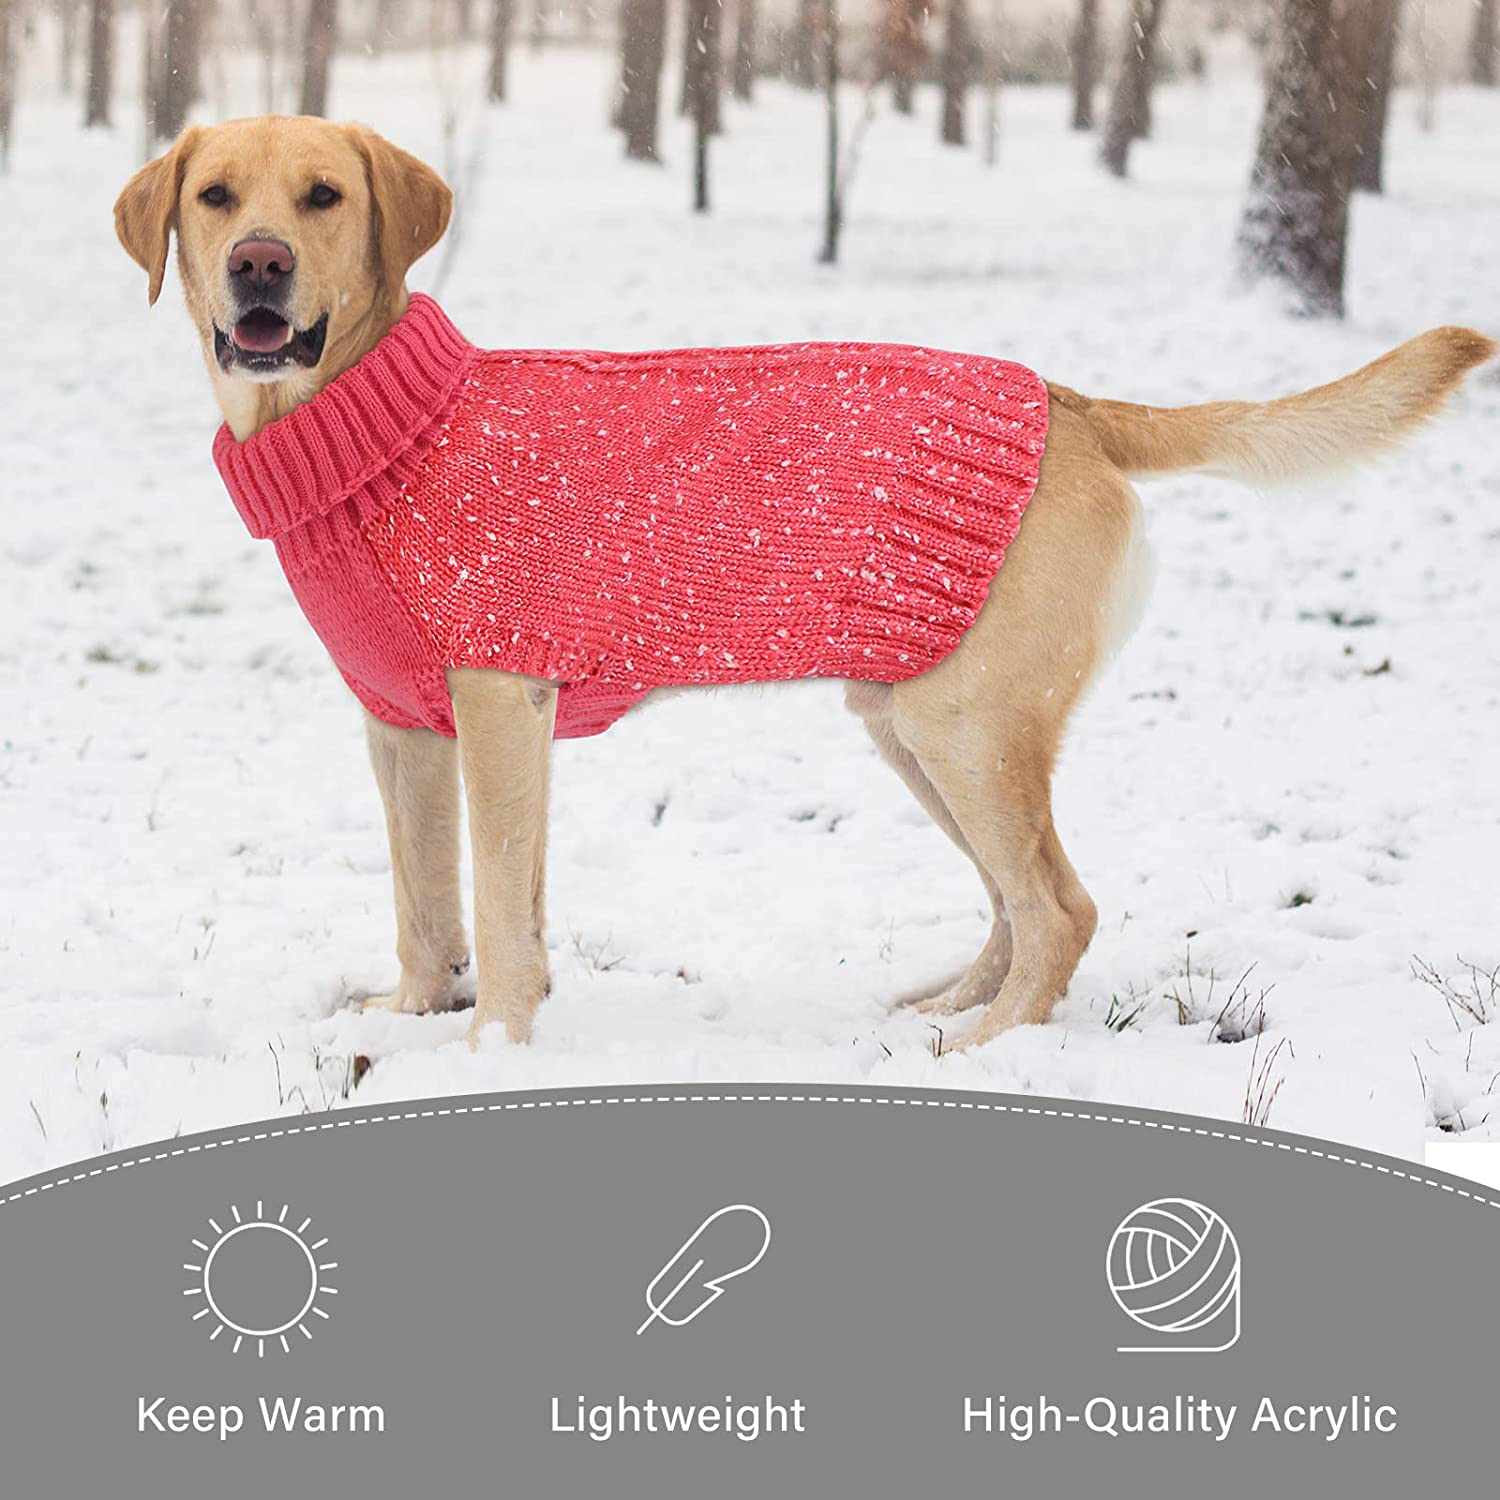 Pedgot 2 Pieces Dog Sweater Turtleneck Knitted Dog Sweater Dog Jumper Coat Warm Pet Winter Clothes Classic Cable Knit Sweater with Yarn Warm Pet Sweater for Fall Winter